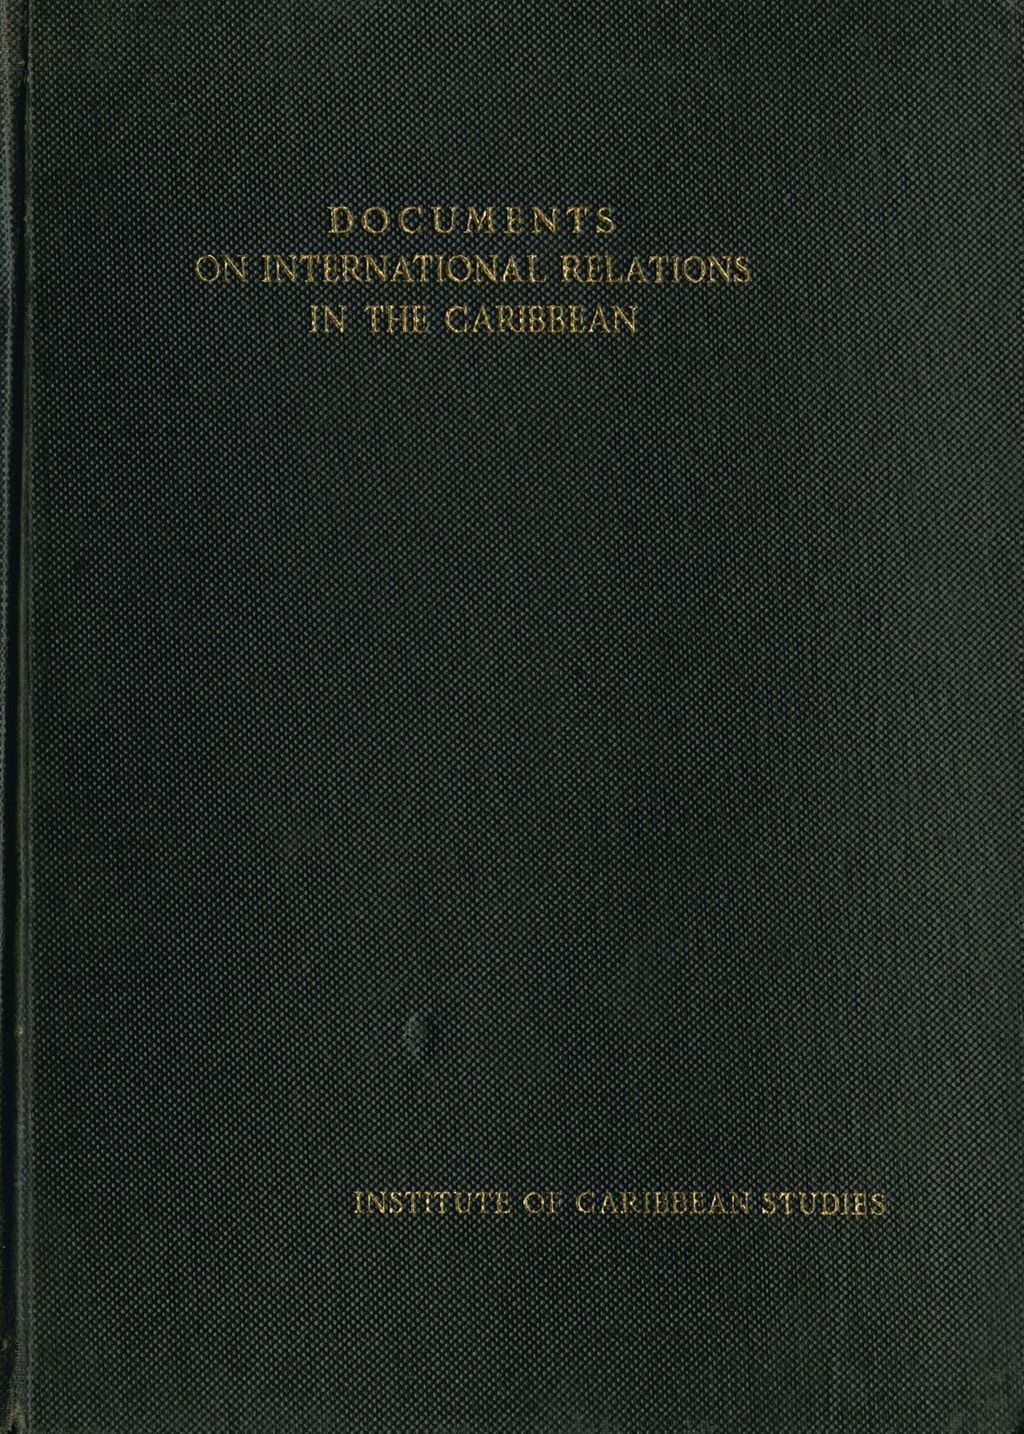 Documents on international relations in the Caribbean (front cover)